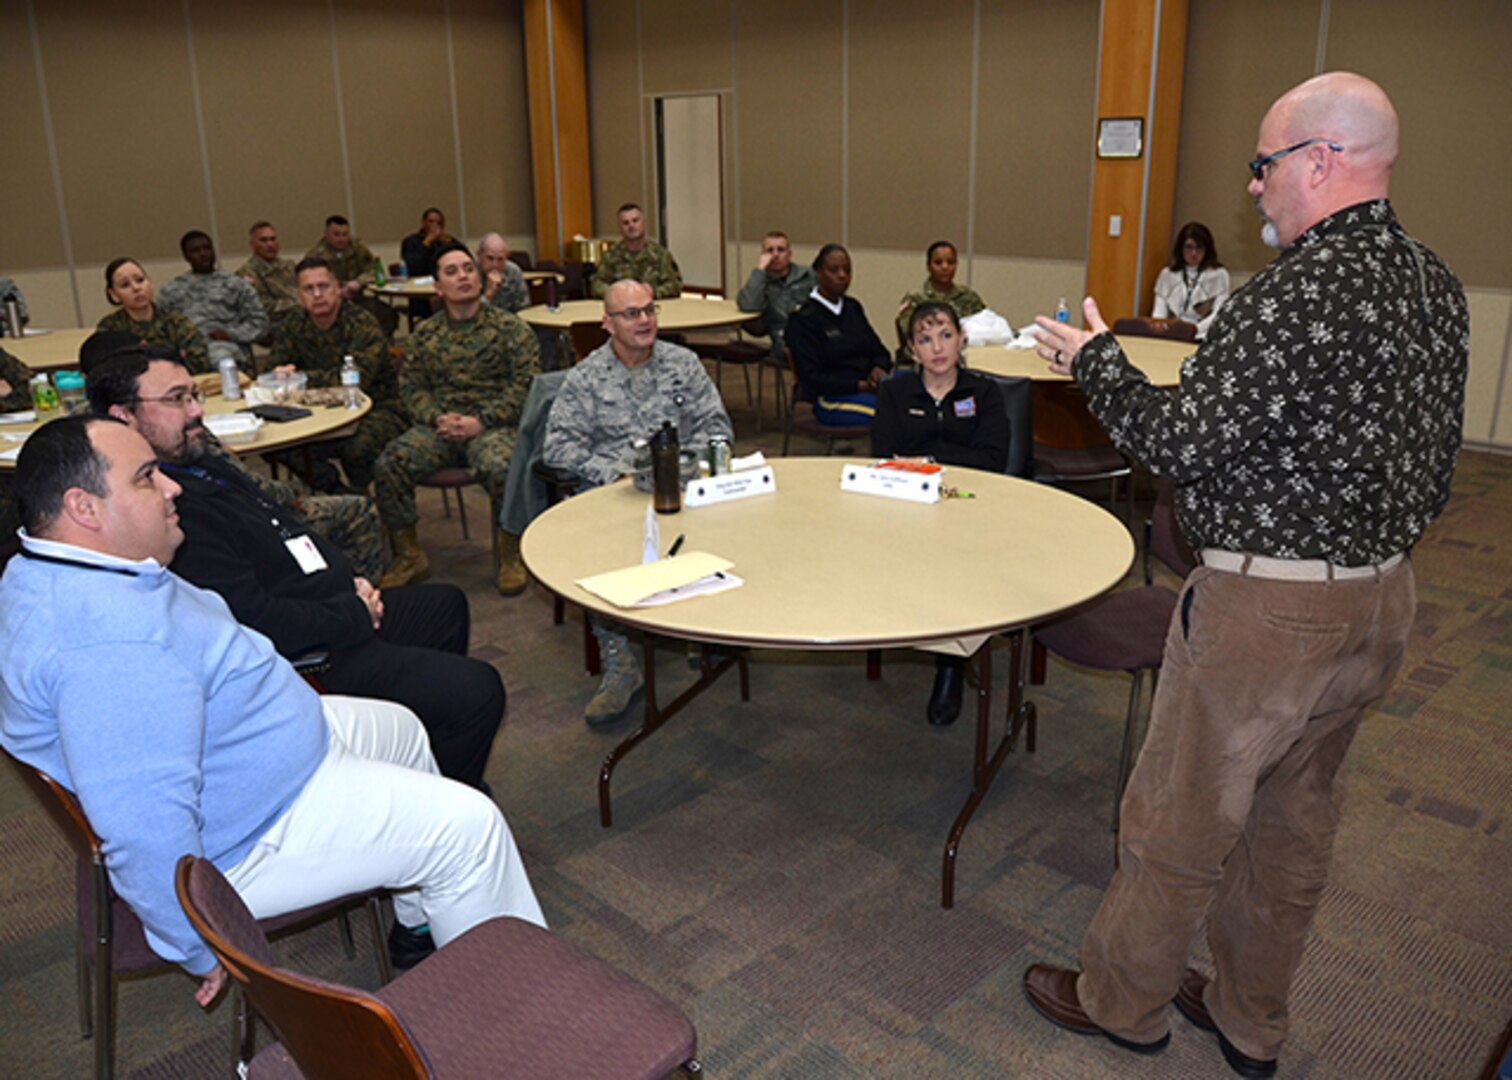 Defense Logistics Agency Aviation's military leaders attend the Military Leader Professional Development 'lunch and learn' event, Jan. 27, 2017 in the Lott's Conference Center on Defense SupplyCenter Richmond, Virginia. DLA Aviation's employee Stewart Young, a customer account specialists in the Customer Operations Directorate shares his story on how McGuire’s Servicemember Transitional Advanced Rehabilitation program and partnership with DLA Aviation has helped him with the physical, mental and emotional recovery, and getting back to work.